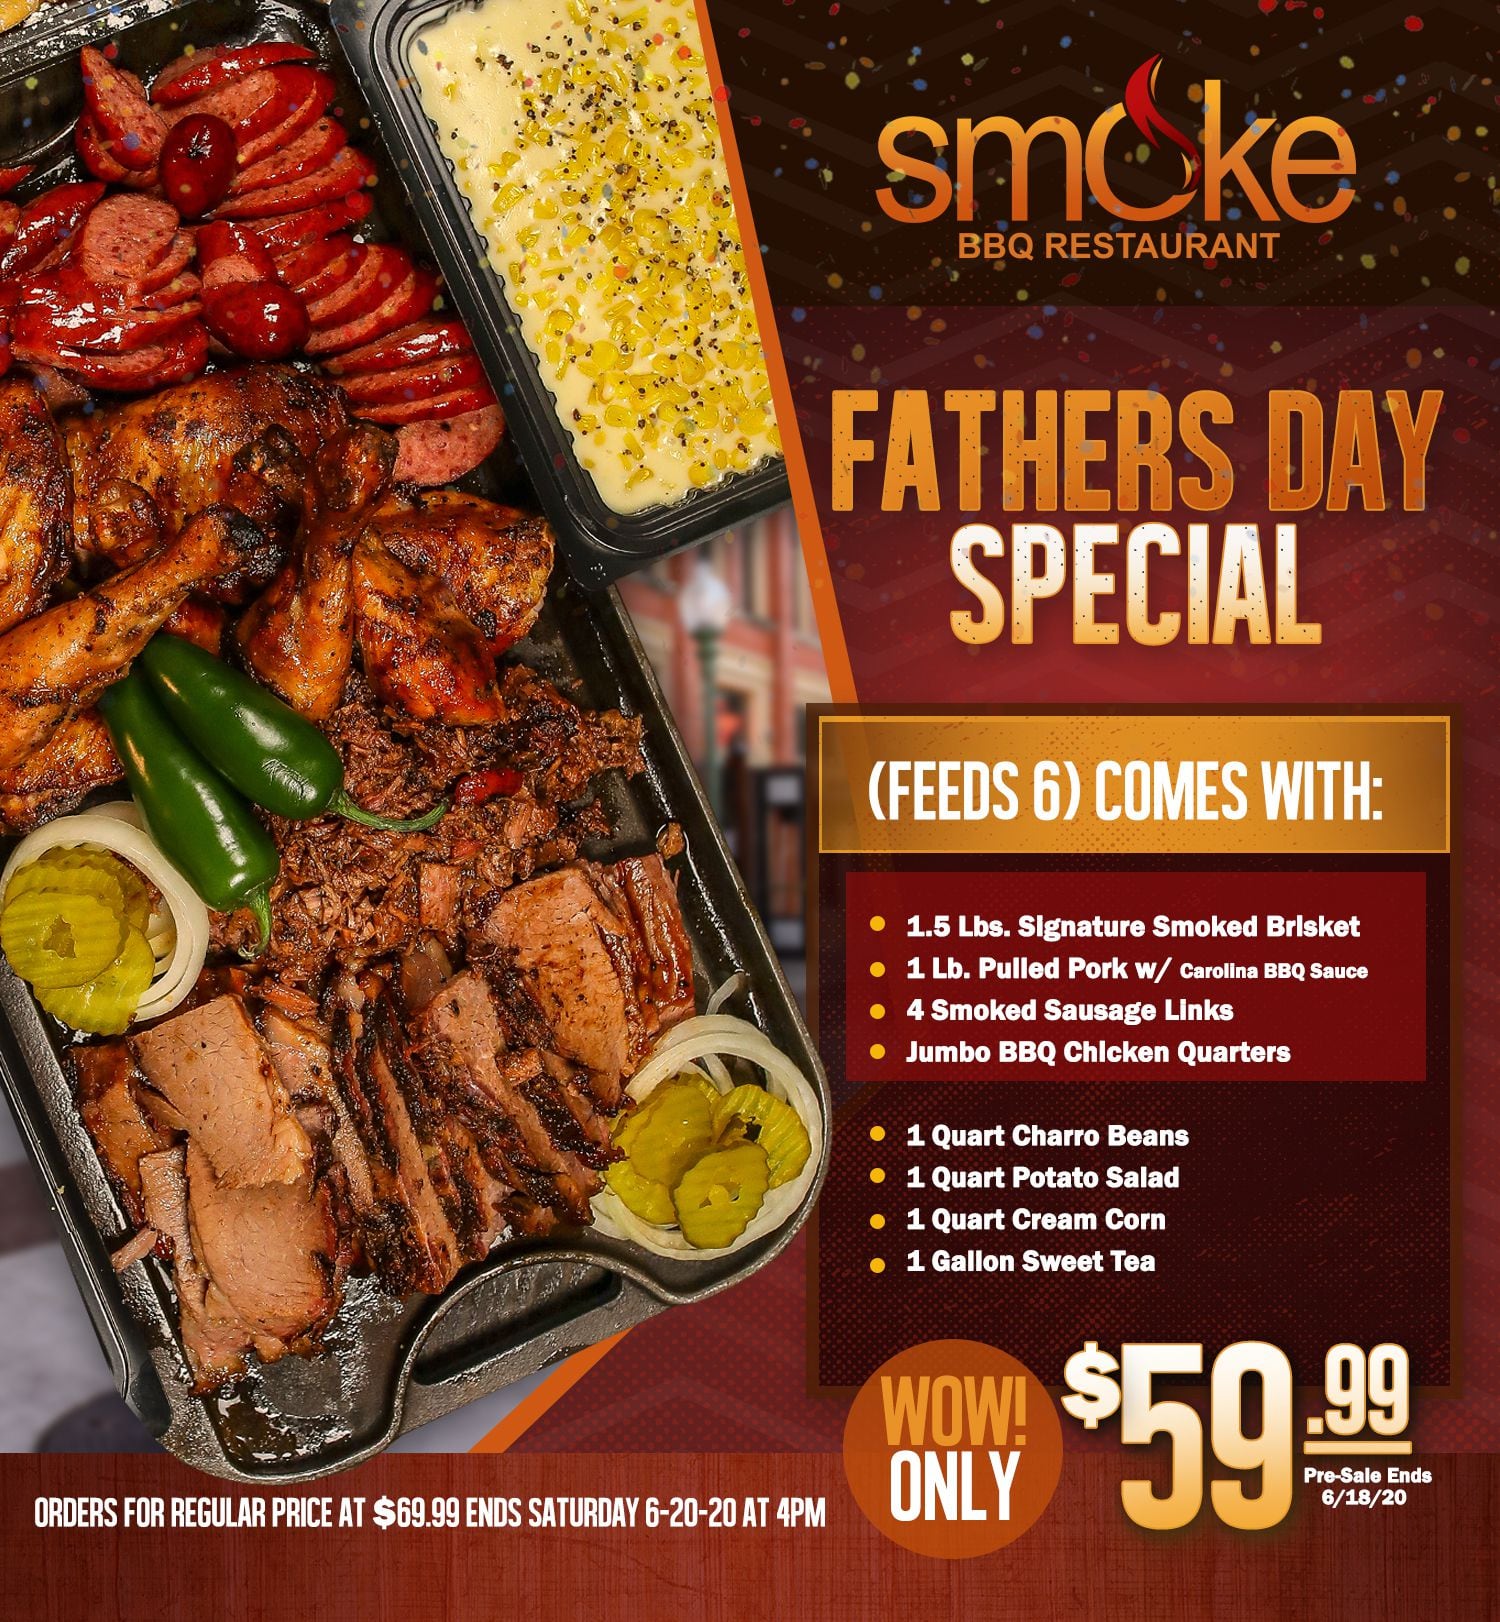 5 San Antonio restaurants with Father’s Day specials 2020